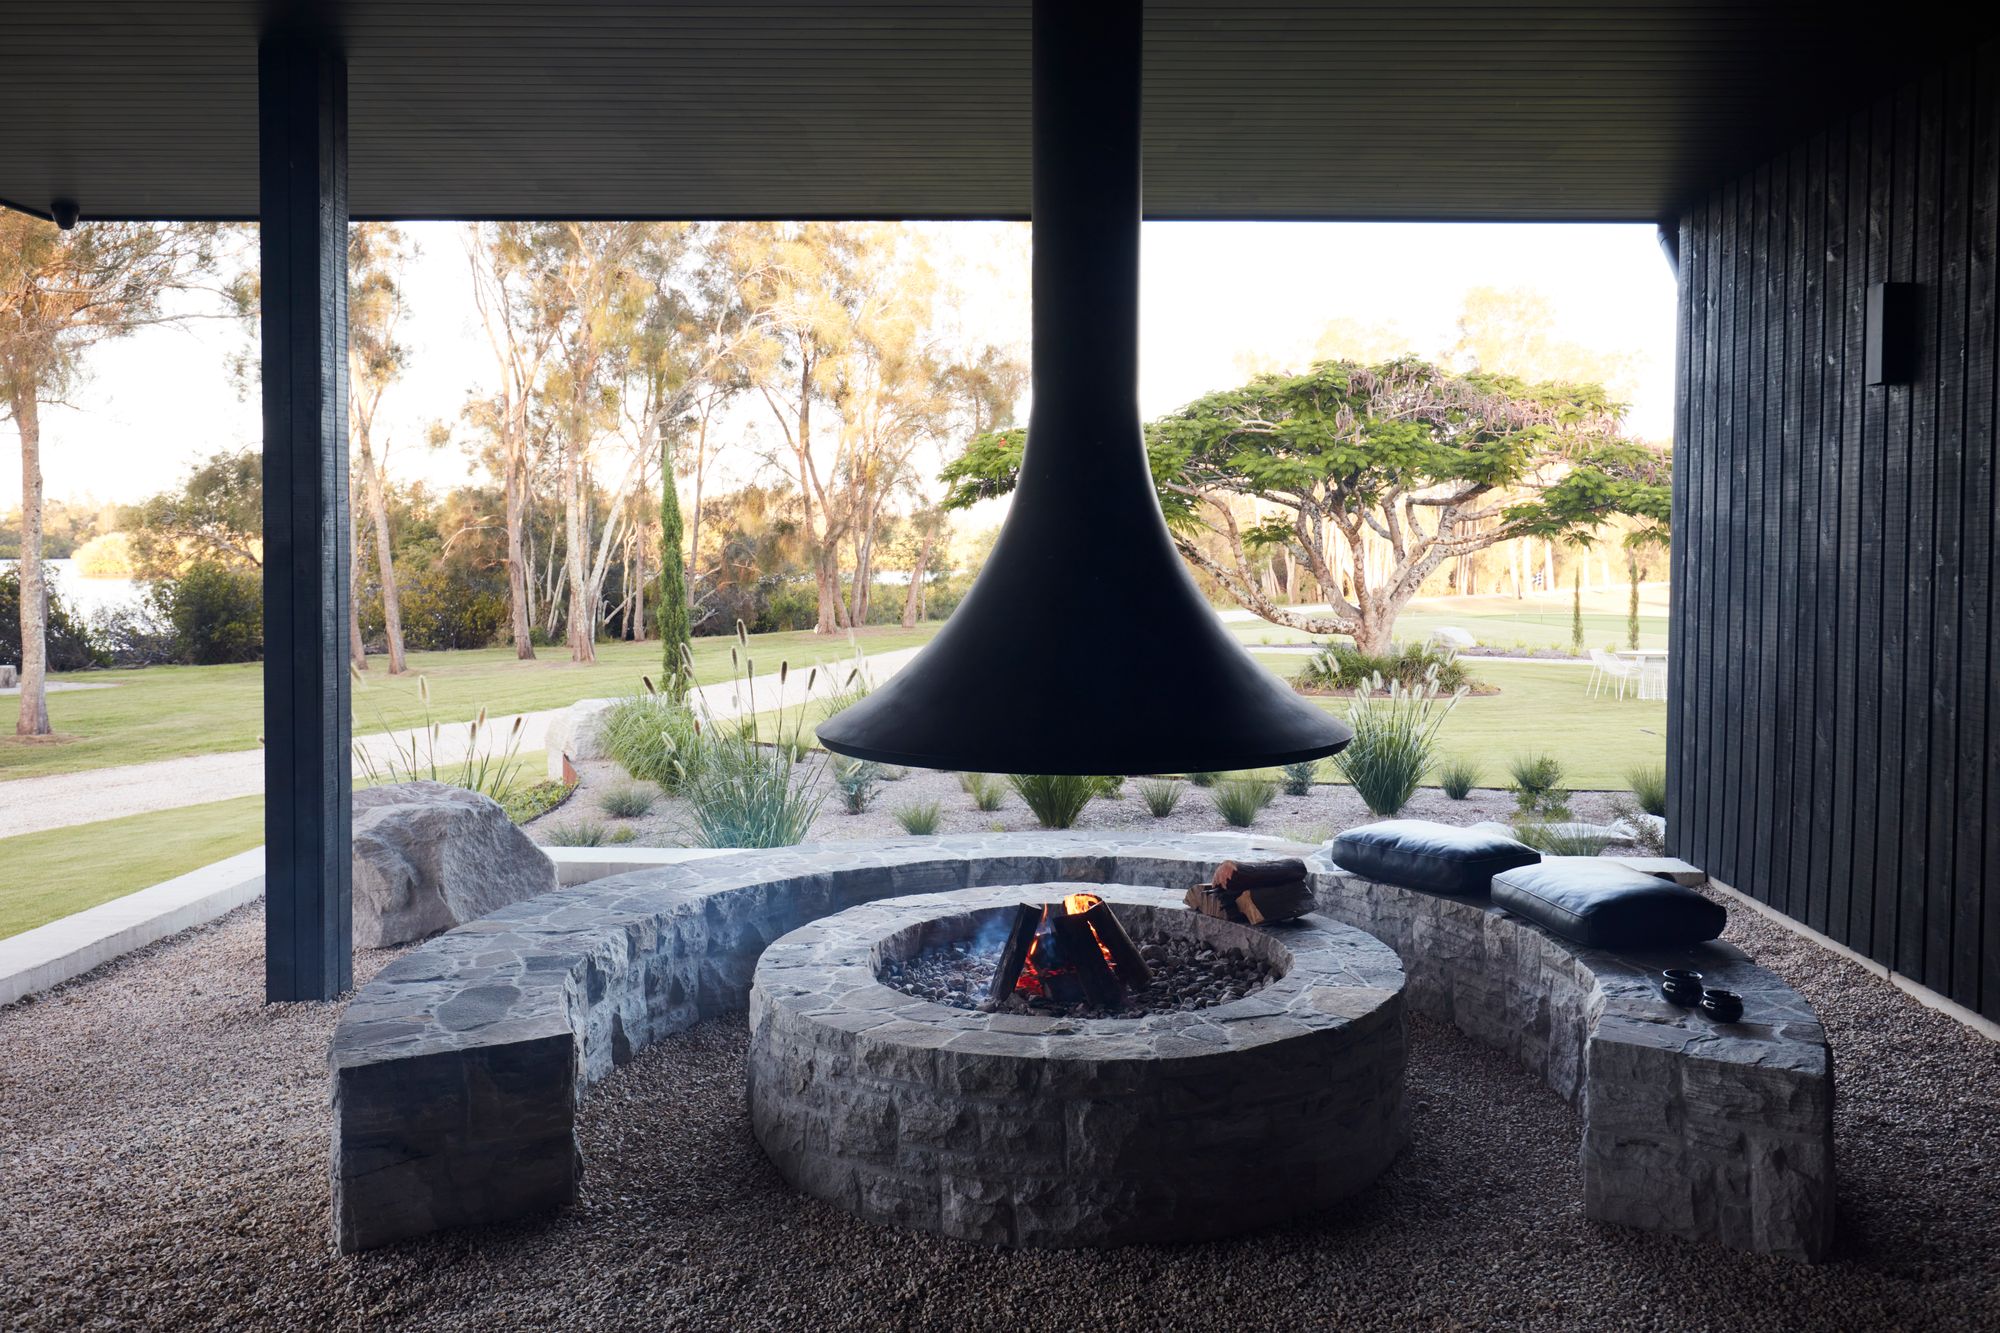 Micalo by Byron Beach Abodes showing exterior outdoor fireplace with stone clad seating